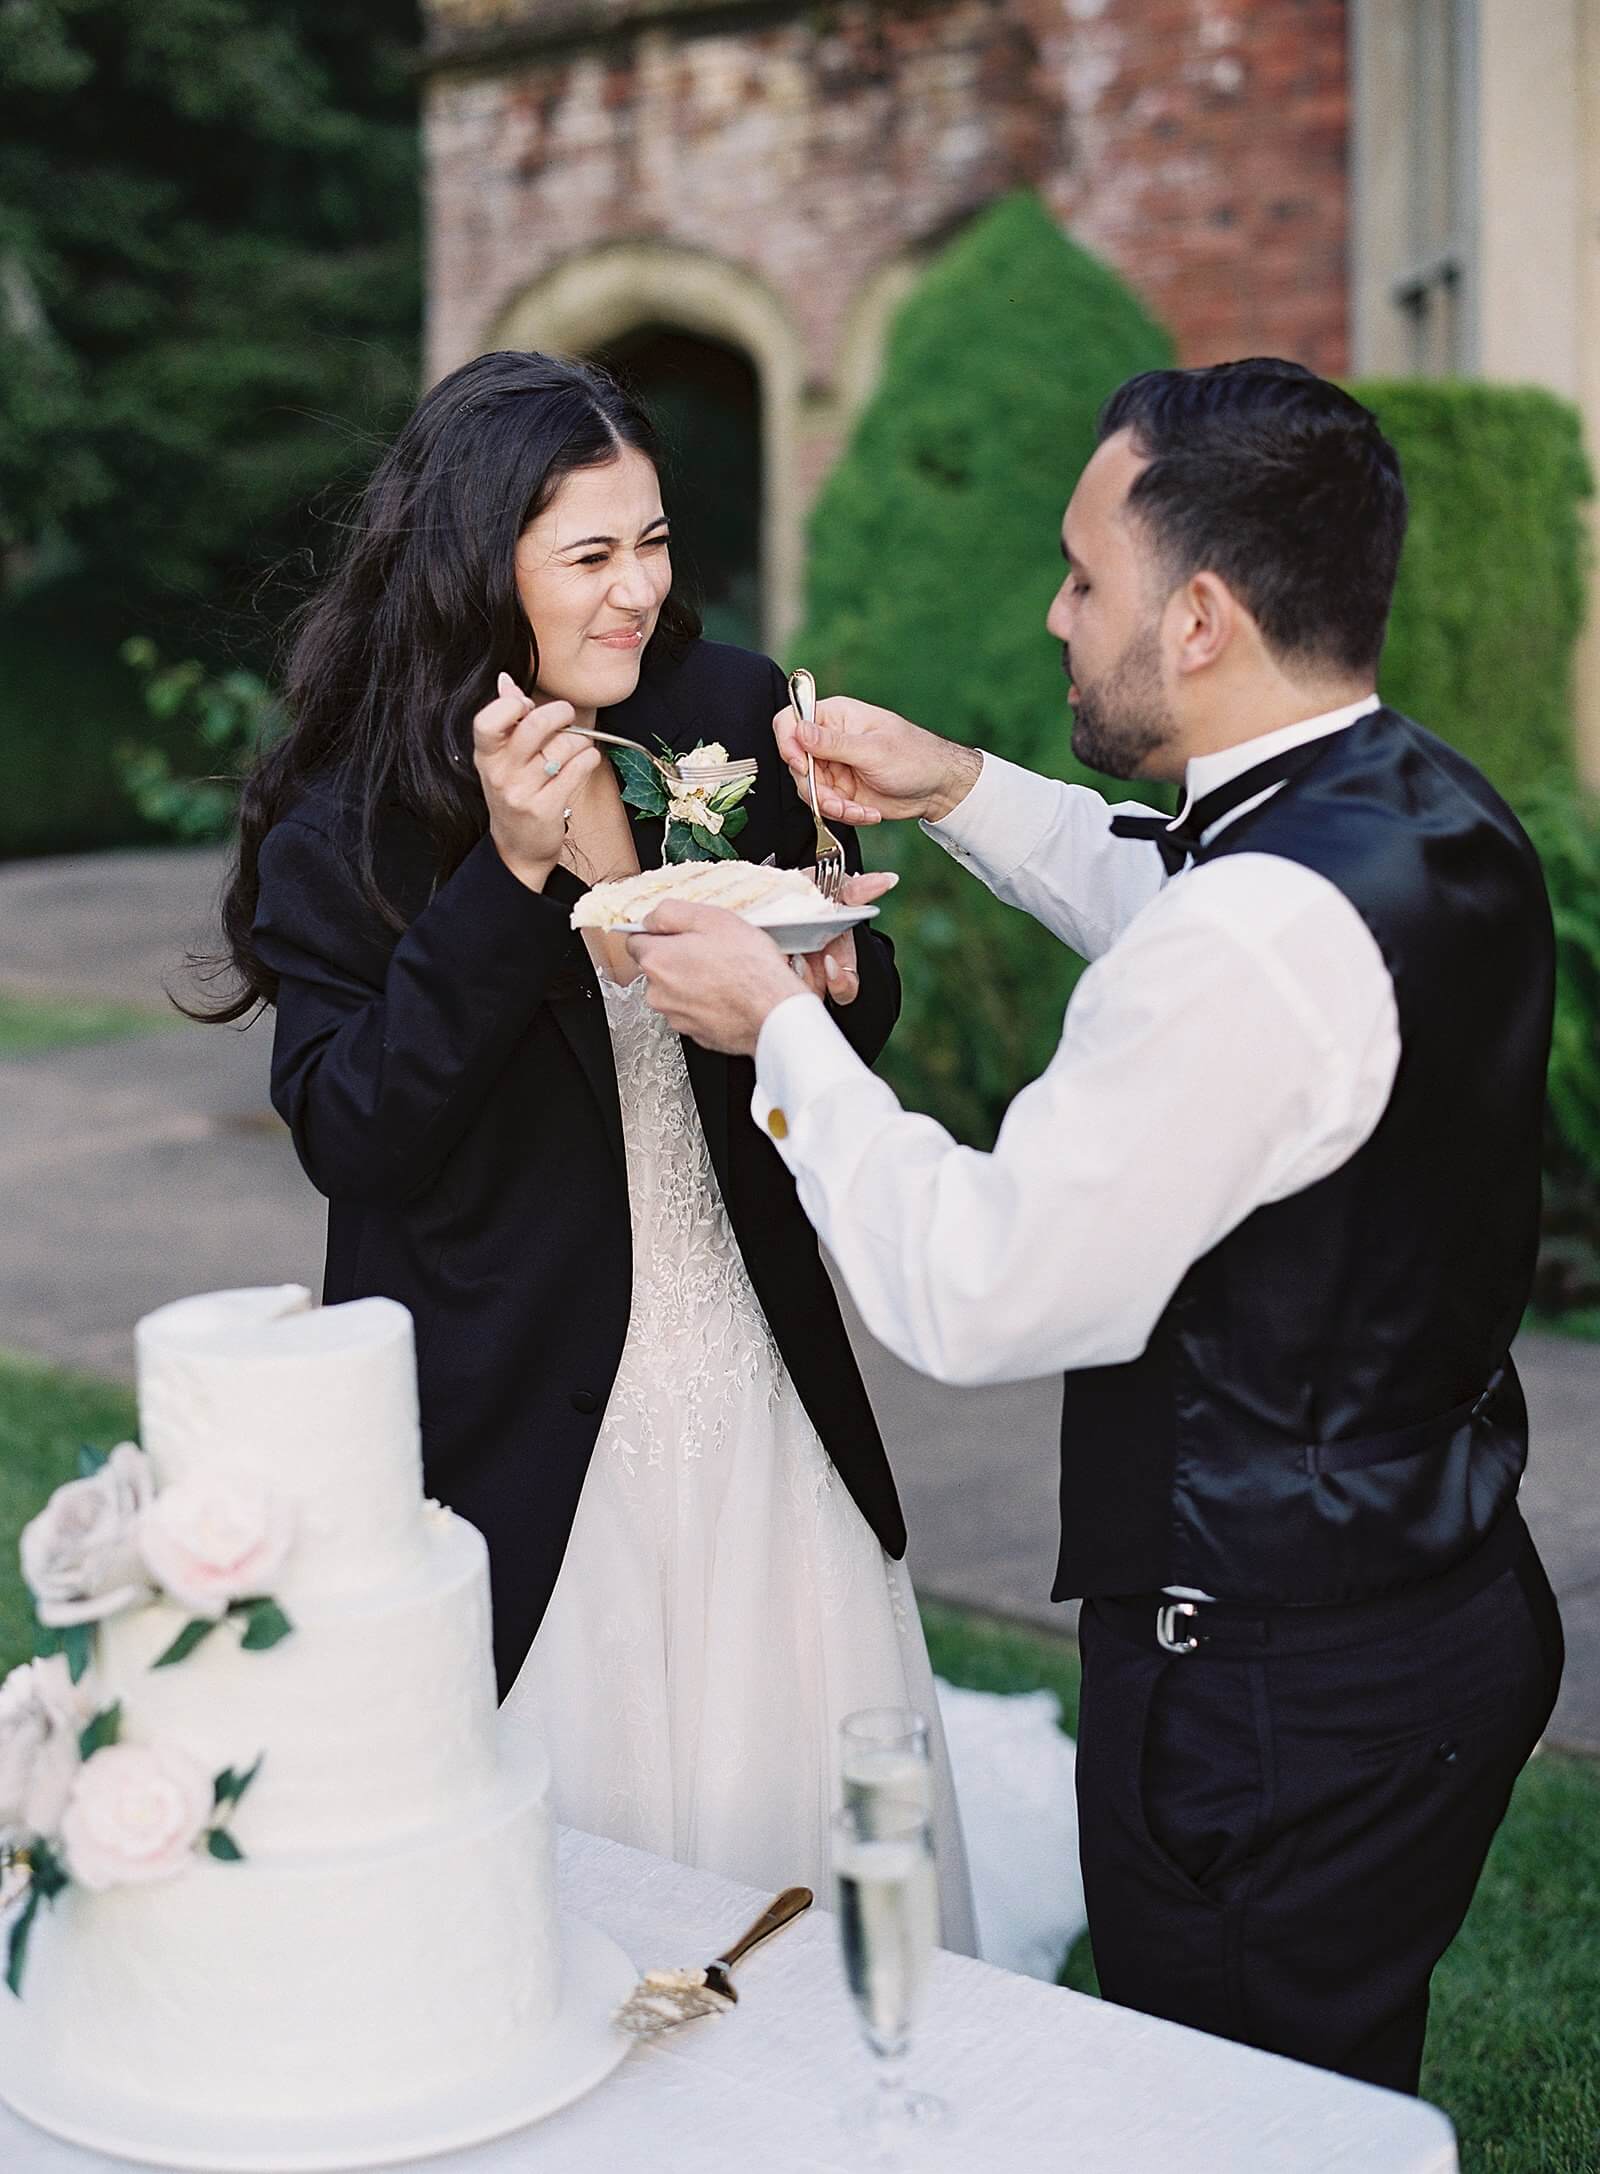 Bride and groom eating their wedding cake at Thornewood Castle - Jacqueline Benét Photography